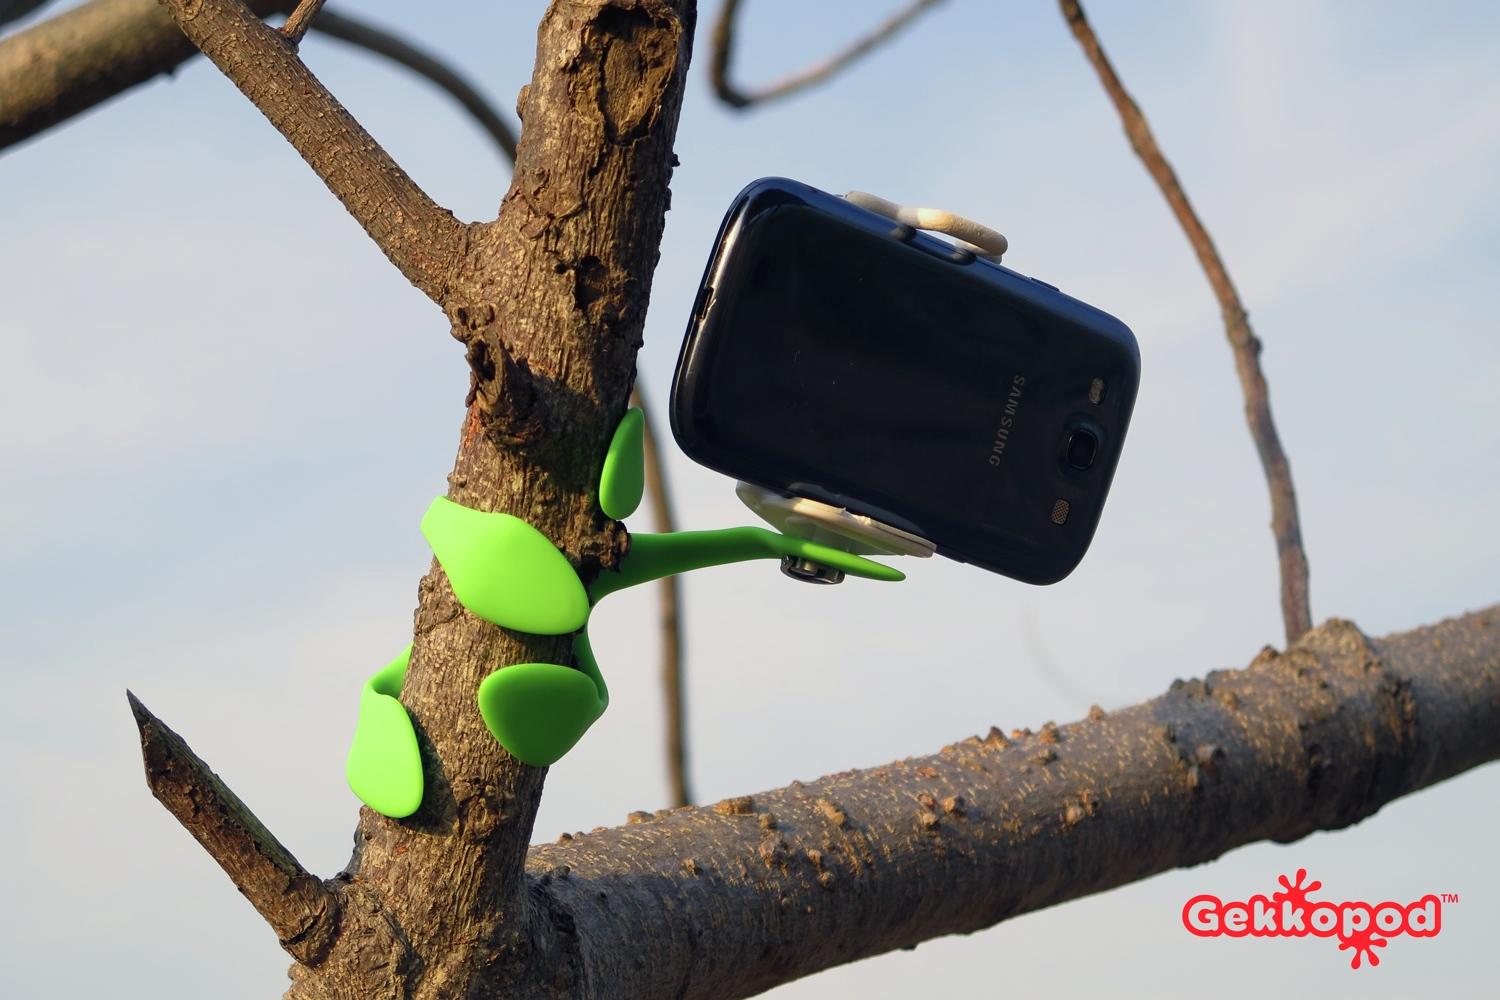 you can mount a camera or phone onto almost anything with the gekkopod 2